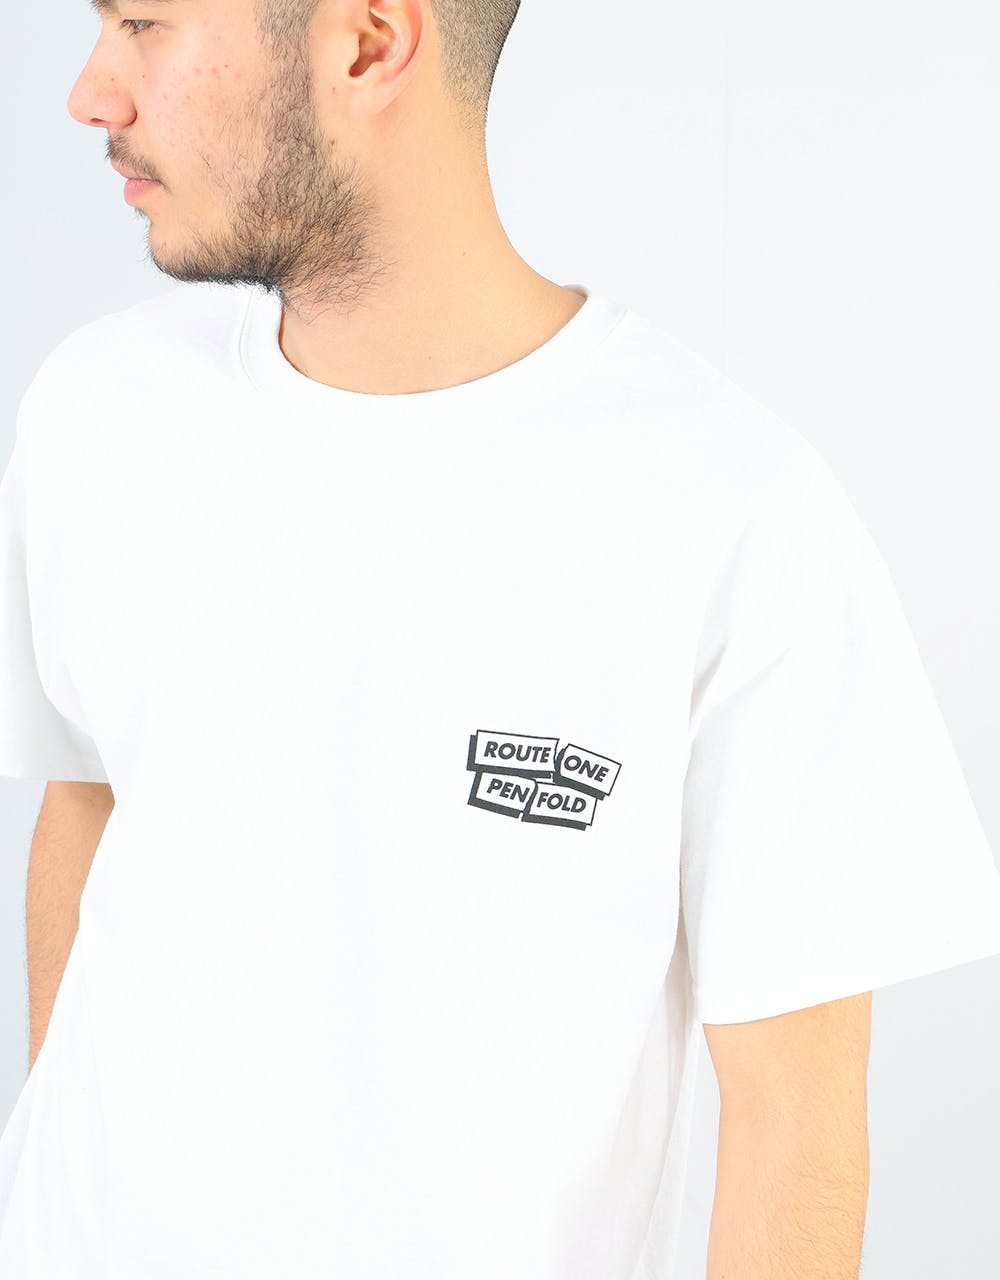 Route One x Mr. Penfold Tear Down T-Shirt - White